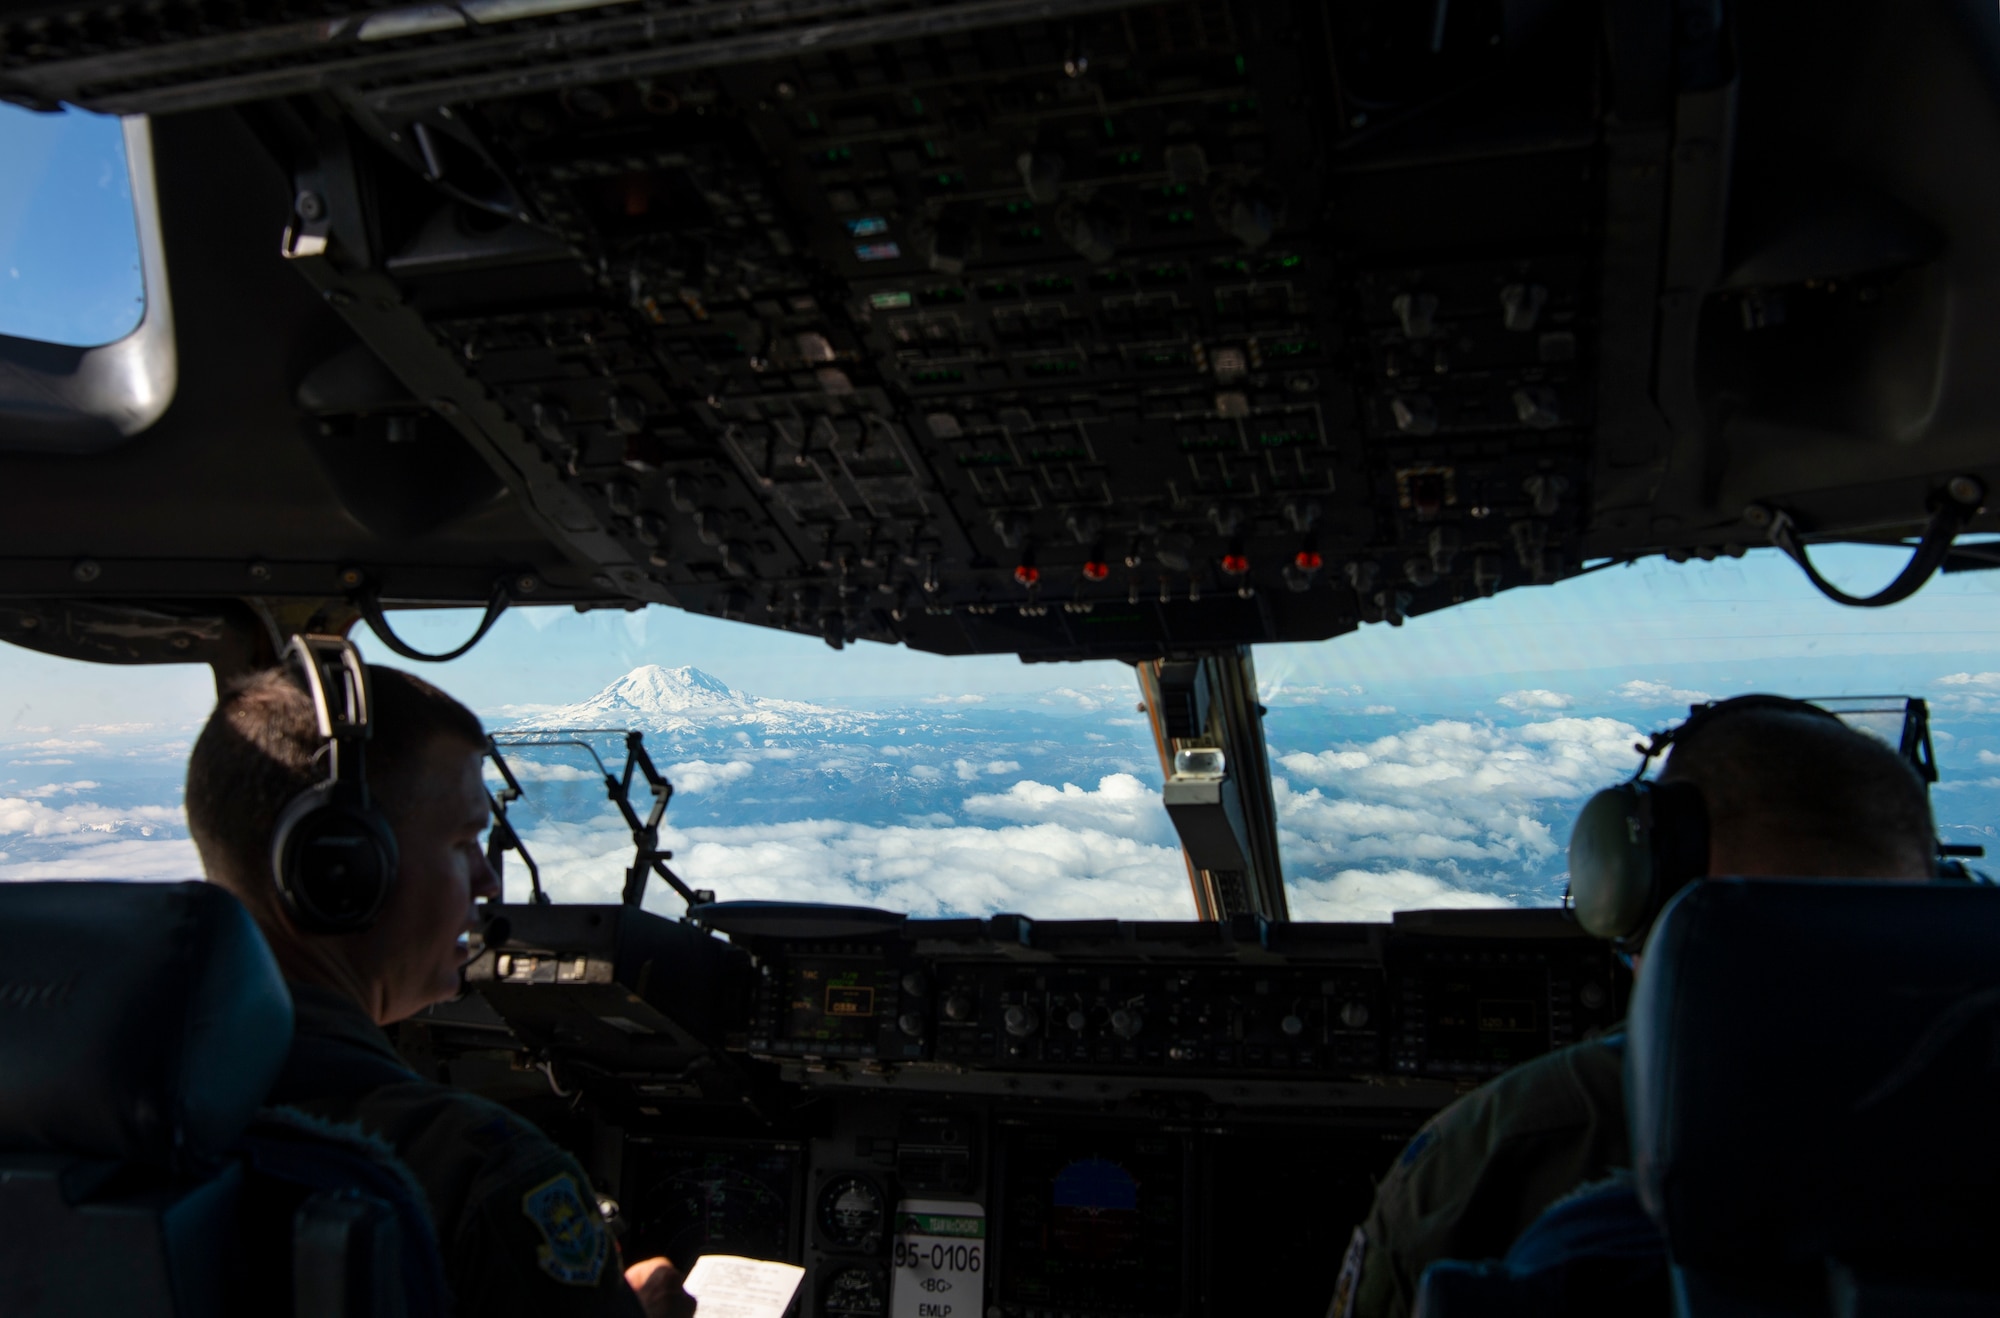 U.S. Air Force Col. Scovill Currin, 62nd Airlift Wing commander, flies a C-17 Globemaster III near Joint Base Lewis-McChord, Wash., Oct. 1, 2019. Two C-17s from McChord Field carried six U.S. Army trucks and communication equipment to test their long-range capabilities in a mobility movement exercise. (U.S. Air Force photo by Senior Airman Tryphena Mayhugh)